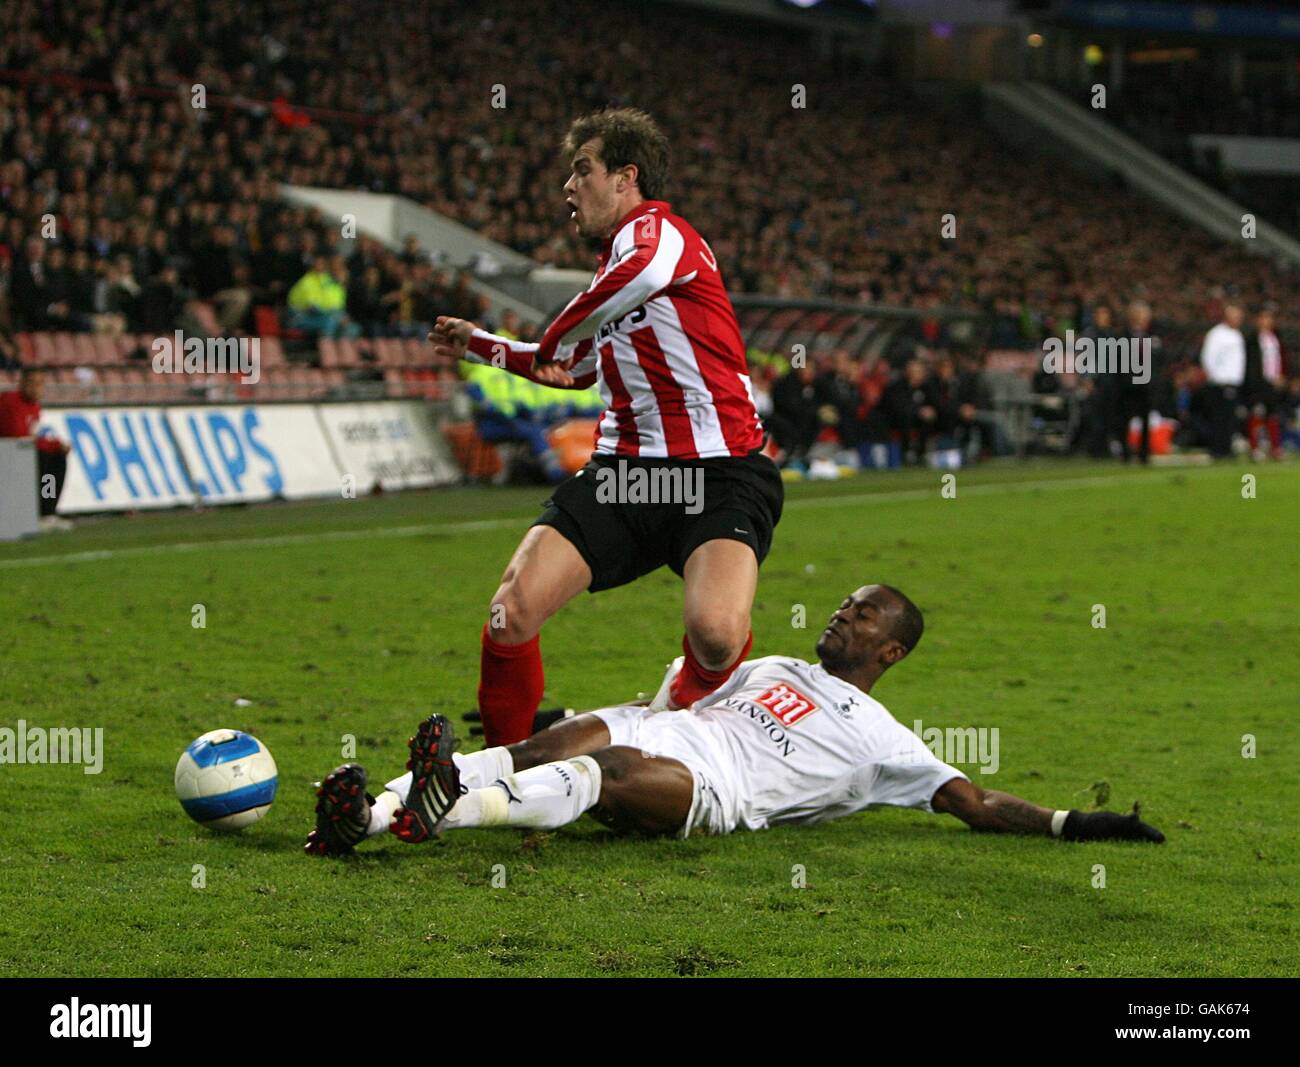 Soccer - UEFA Cup - Round Of 16 - Second Leg - PSV Eindhoven v Tottenham Hotspur - Philips Stadion. Tottenham Hotspurs' Didier Zokora fouls PSV's Danko Lazovic which earns him a yellow card Stock Photo